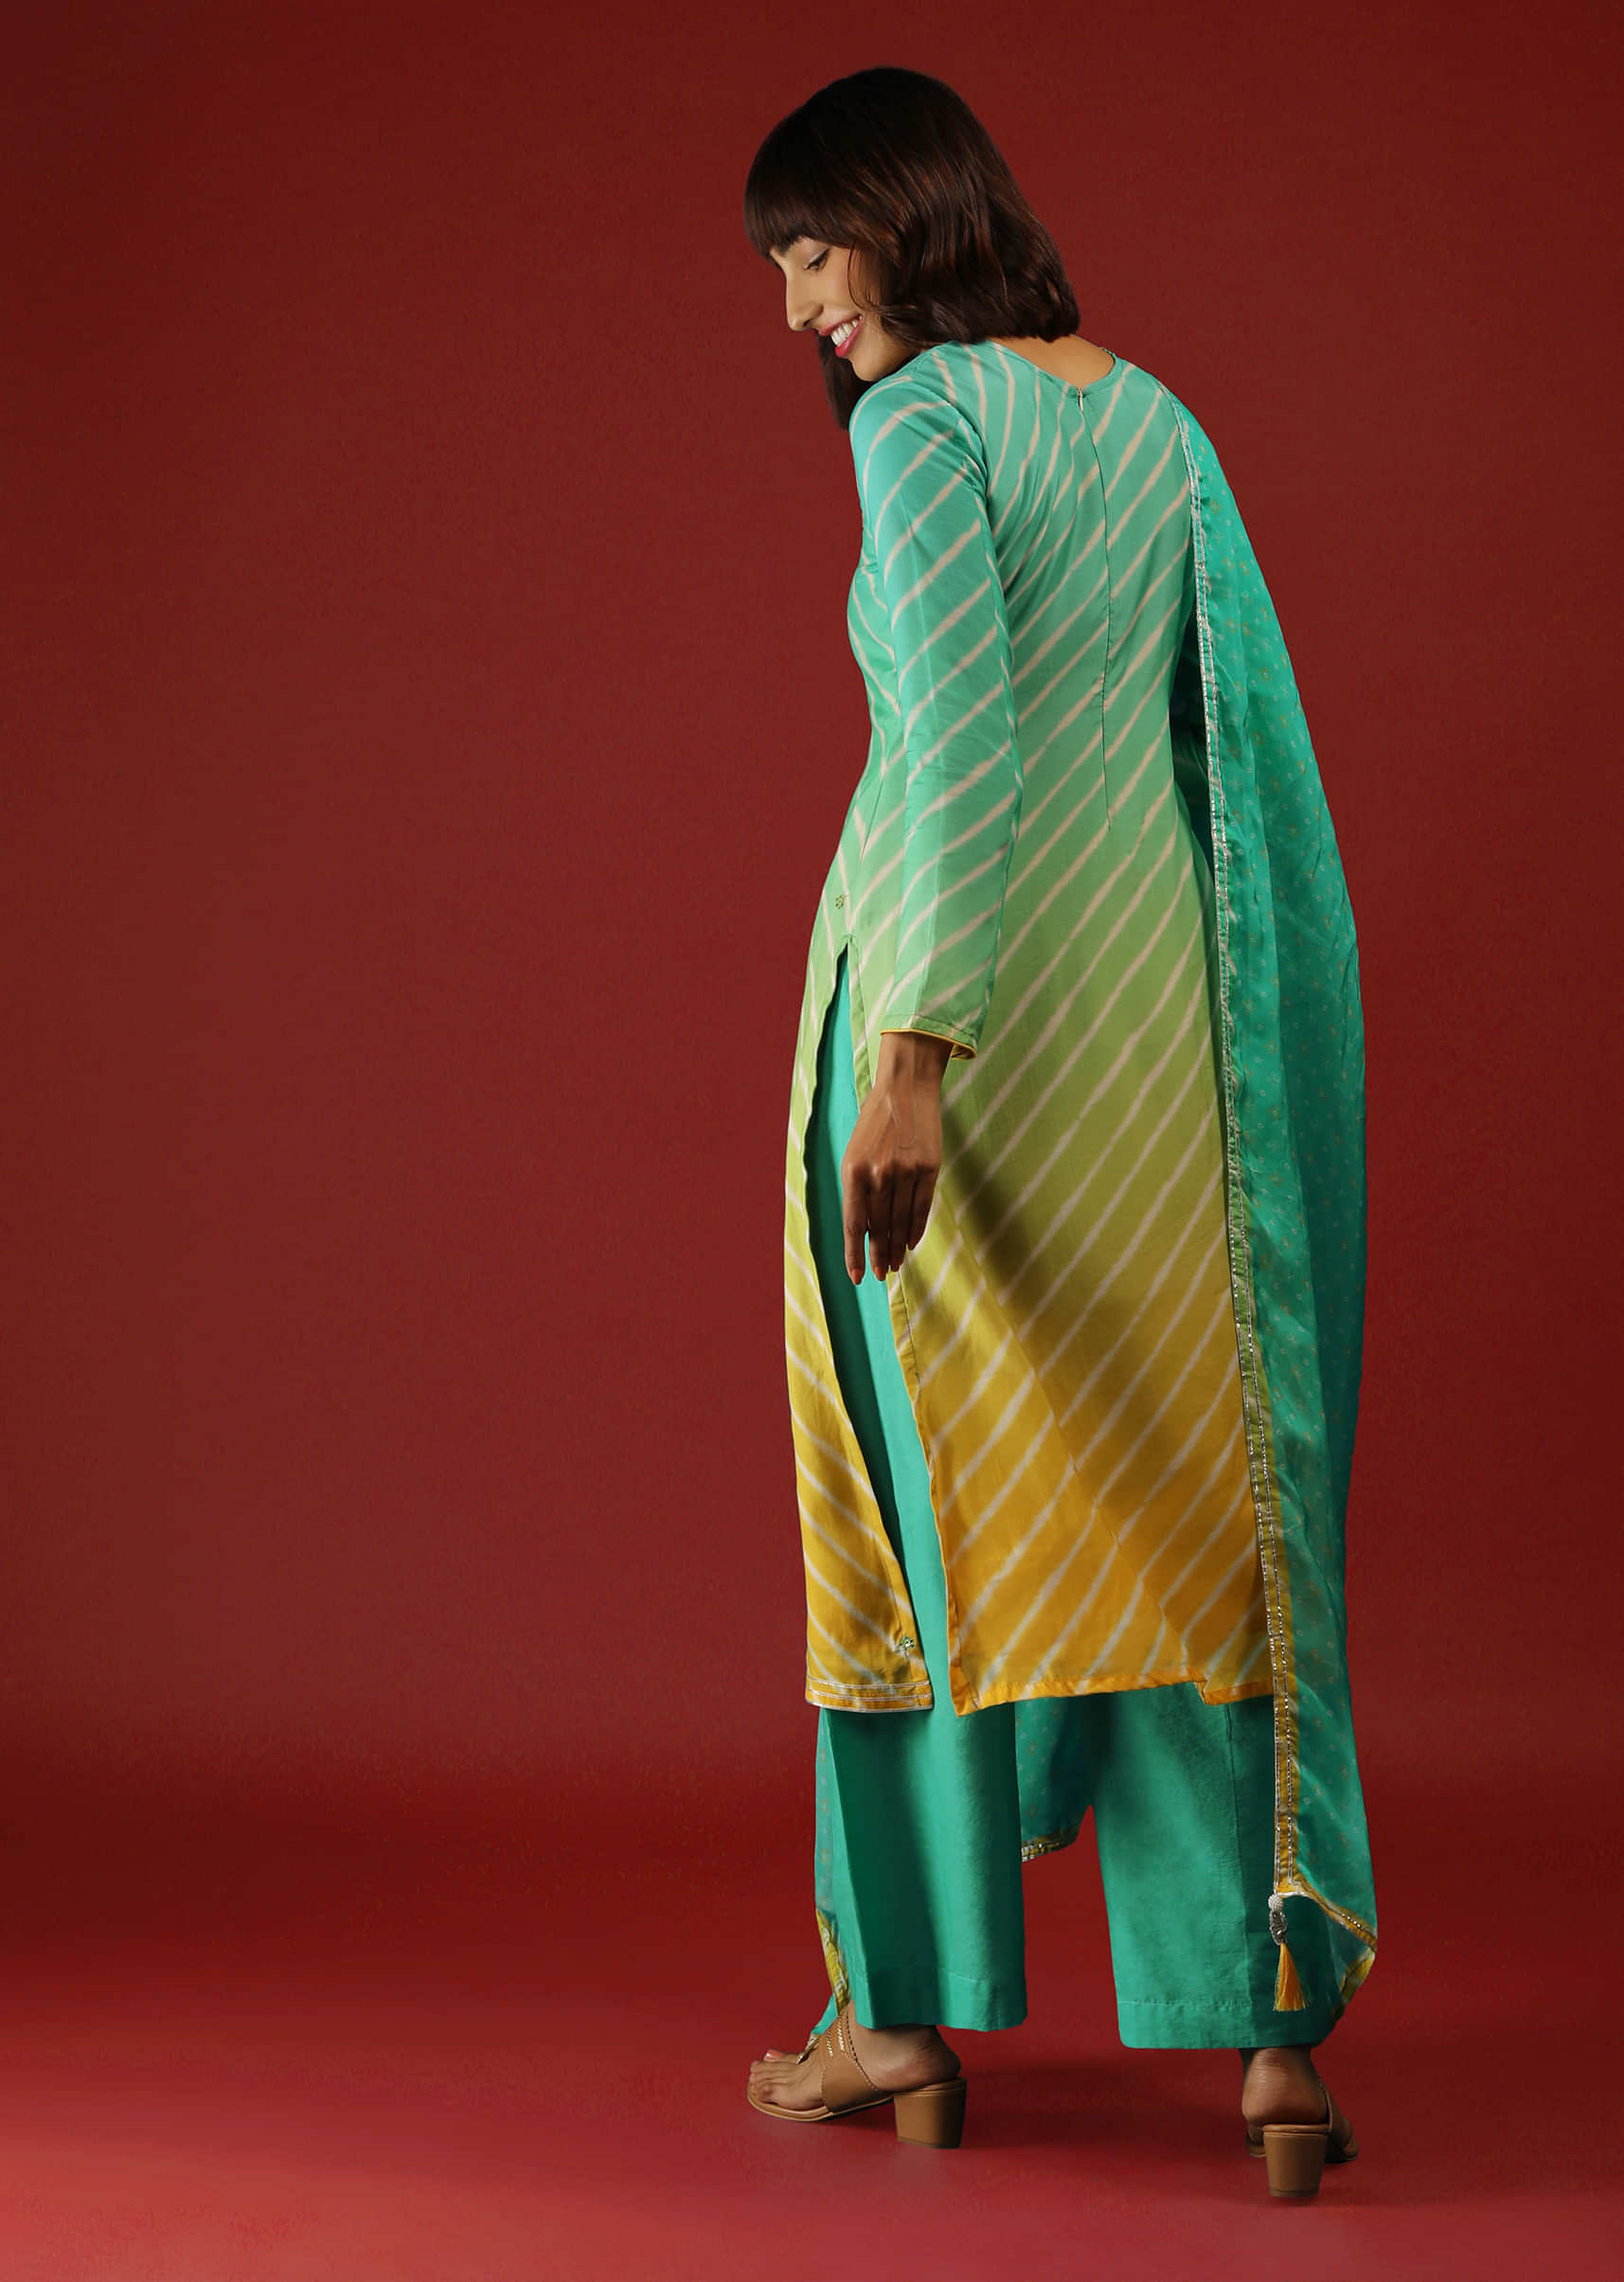 Turquoise And Yellow Ombre Straight Cut Palazzo Suit With Lehariya Print And Bandhani Dupatta  